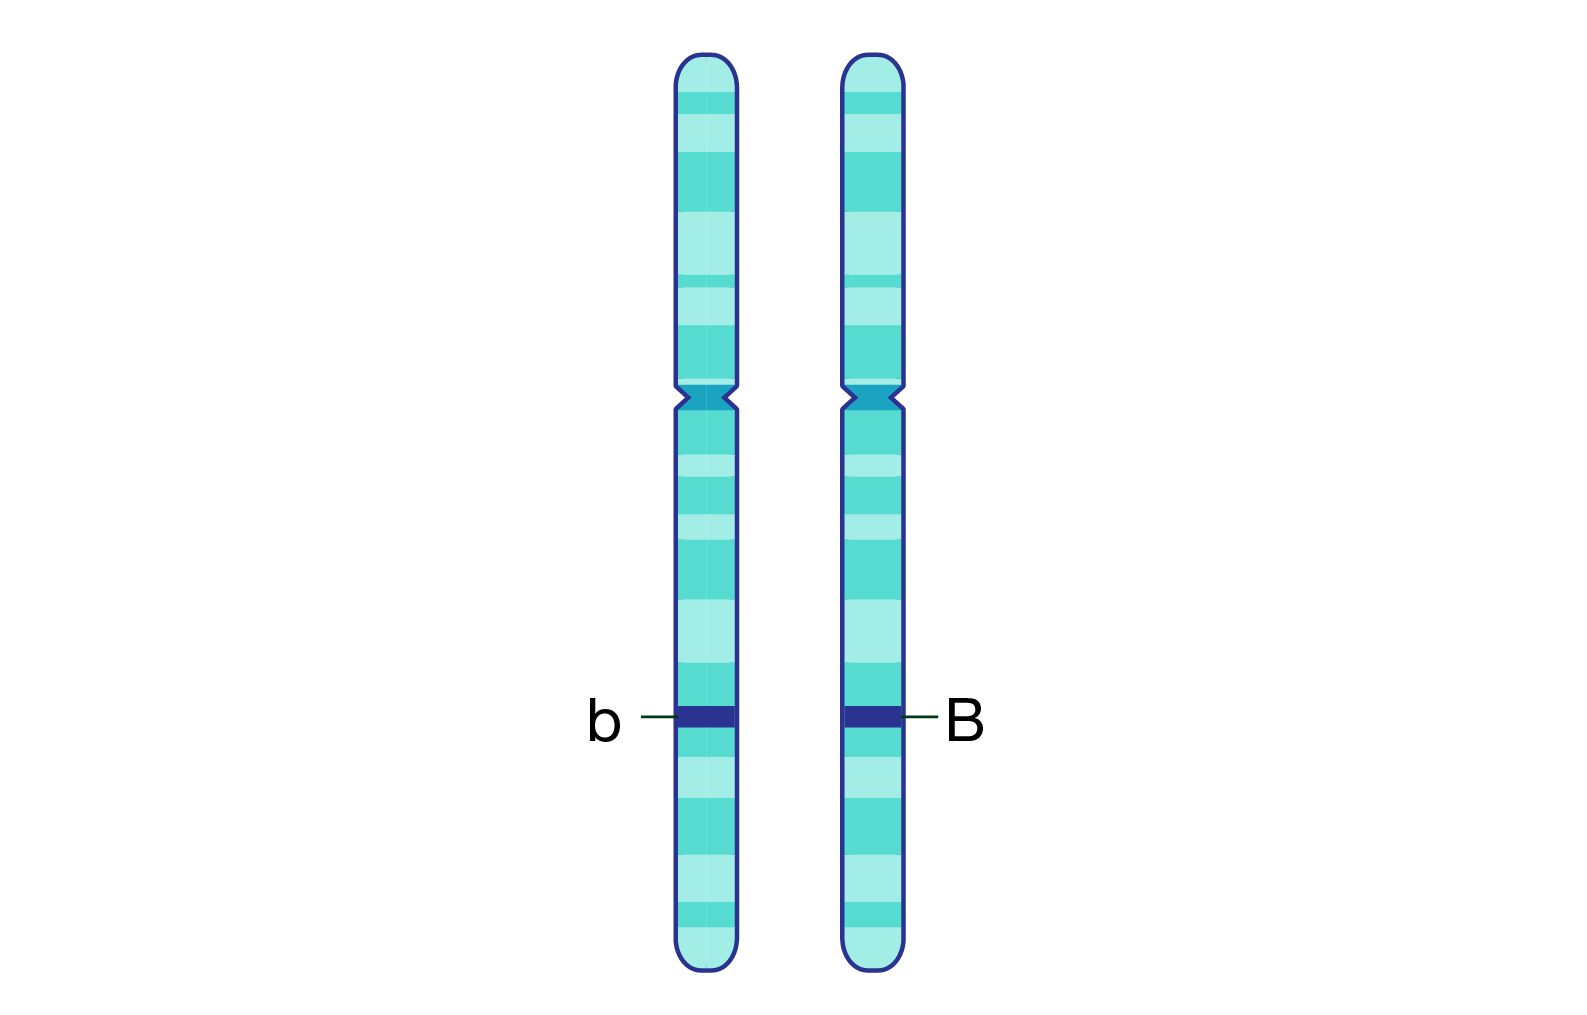 Diagram of two homologous linear chromosomes with different alleles for the same gene. The gene on each chromosome is marked as a dark blue, horizontal stripe. One allele is marked "b," whereas the other is marked "B".